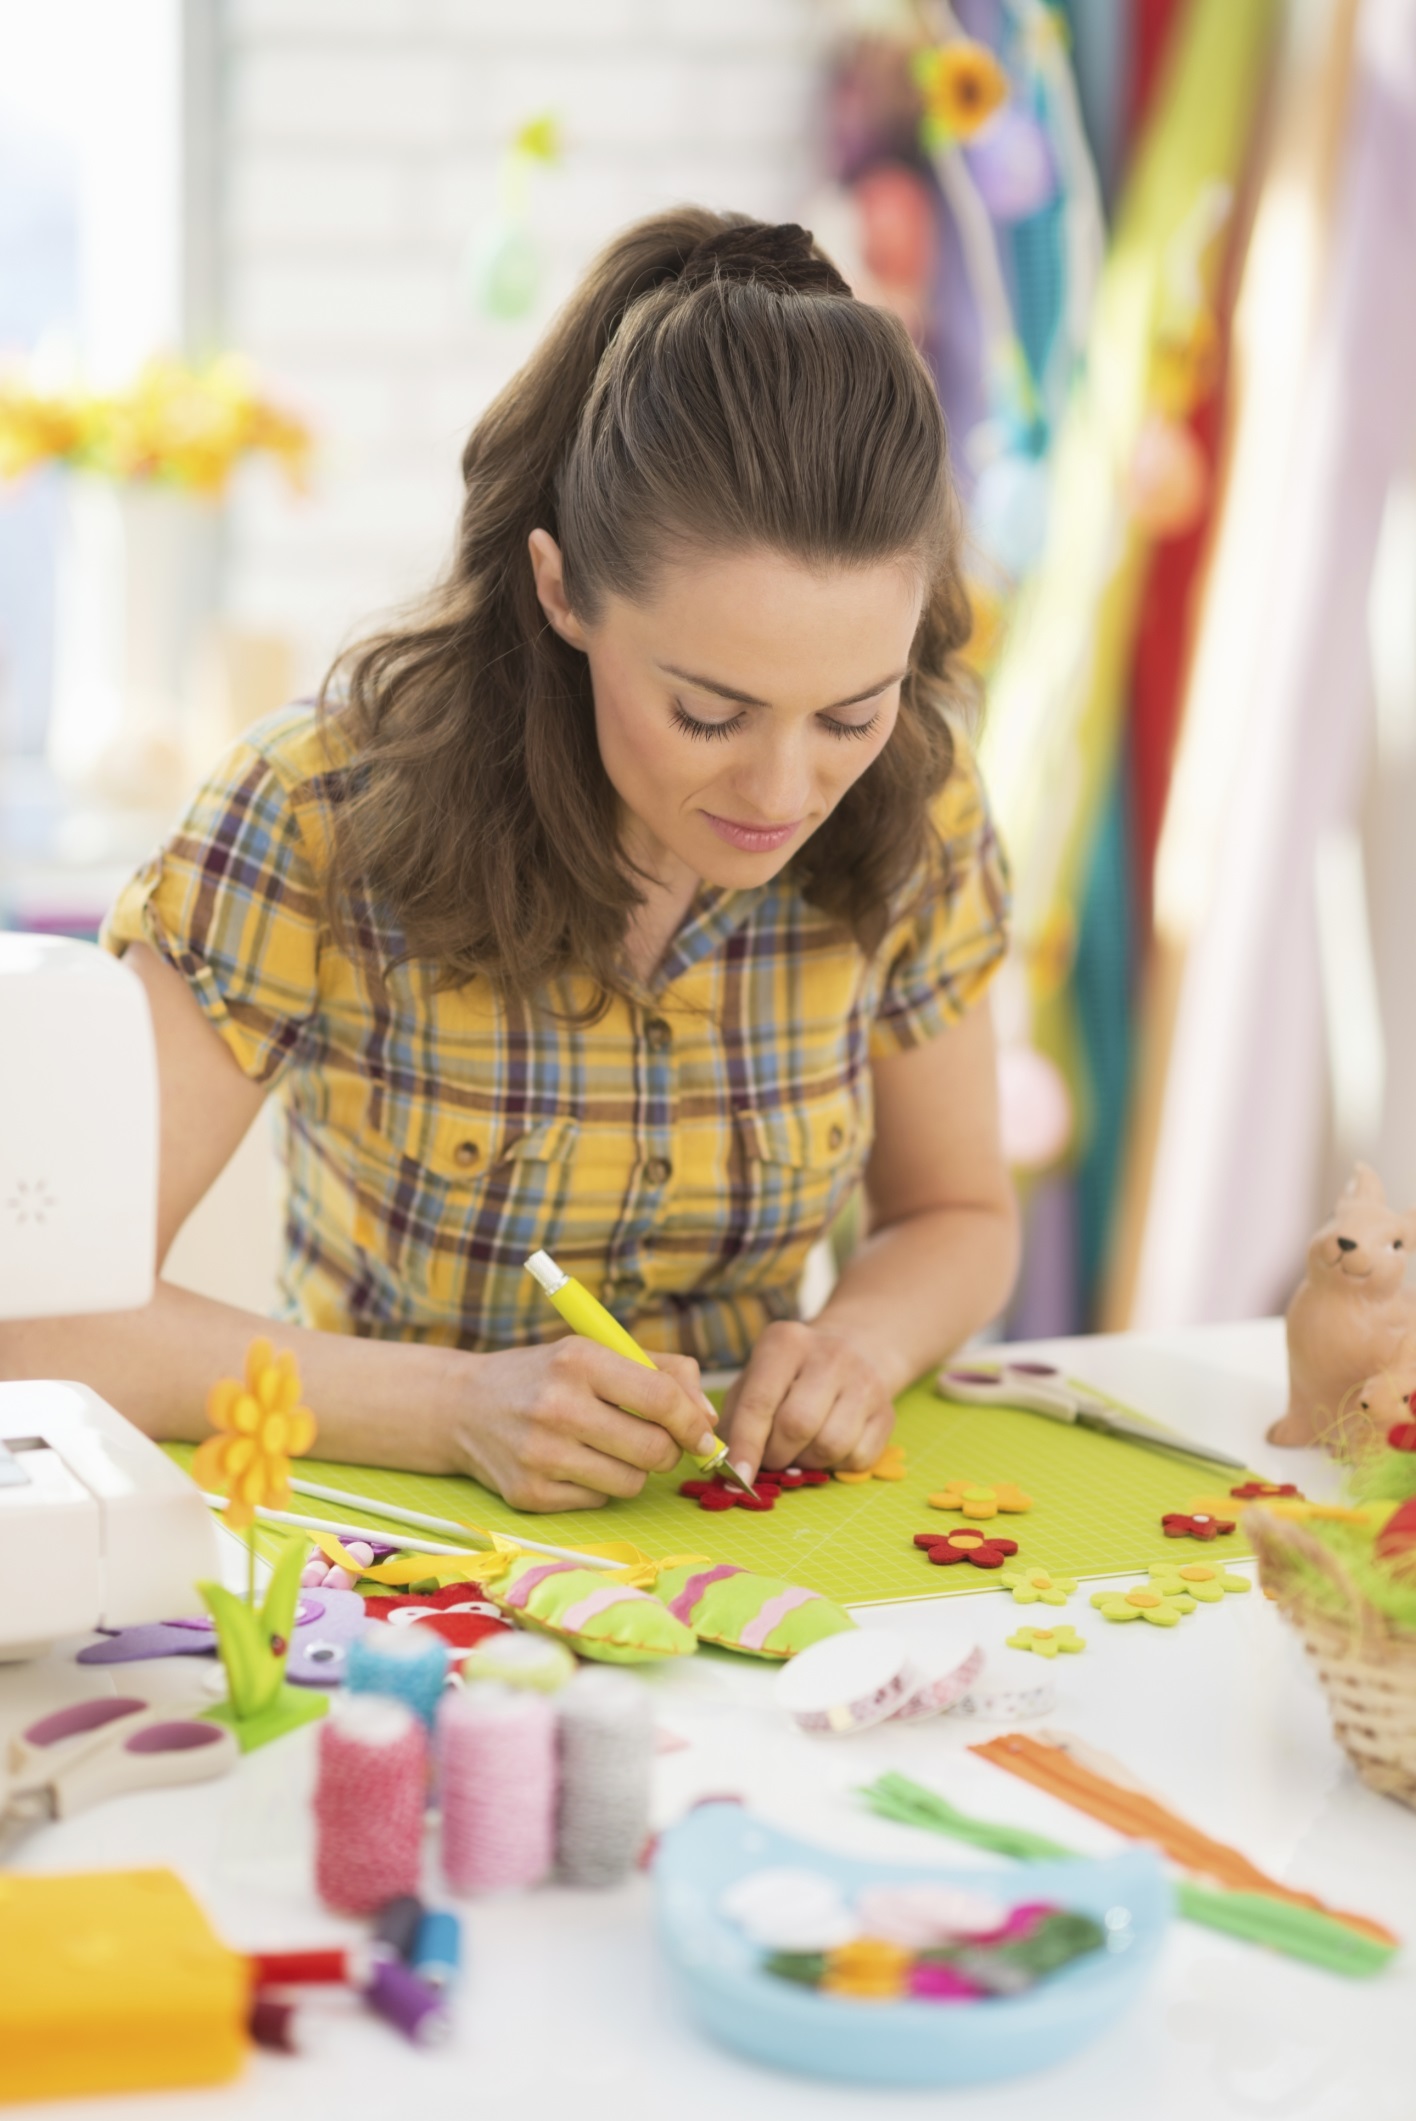 How to Successfully Plan a Crafting Session for Busy Folks | Plaid Online